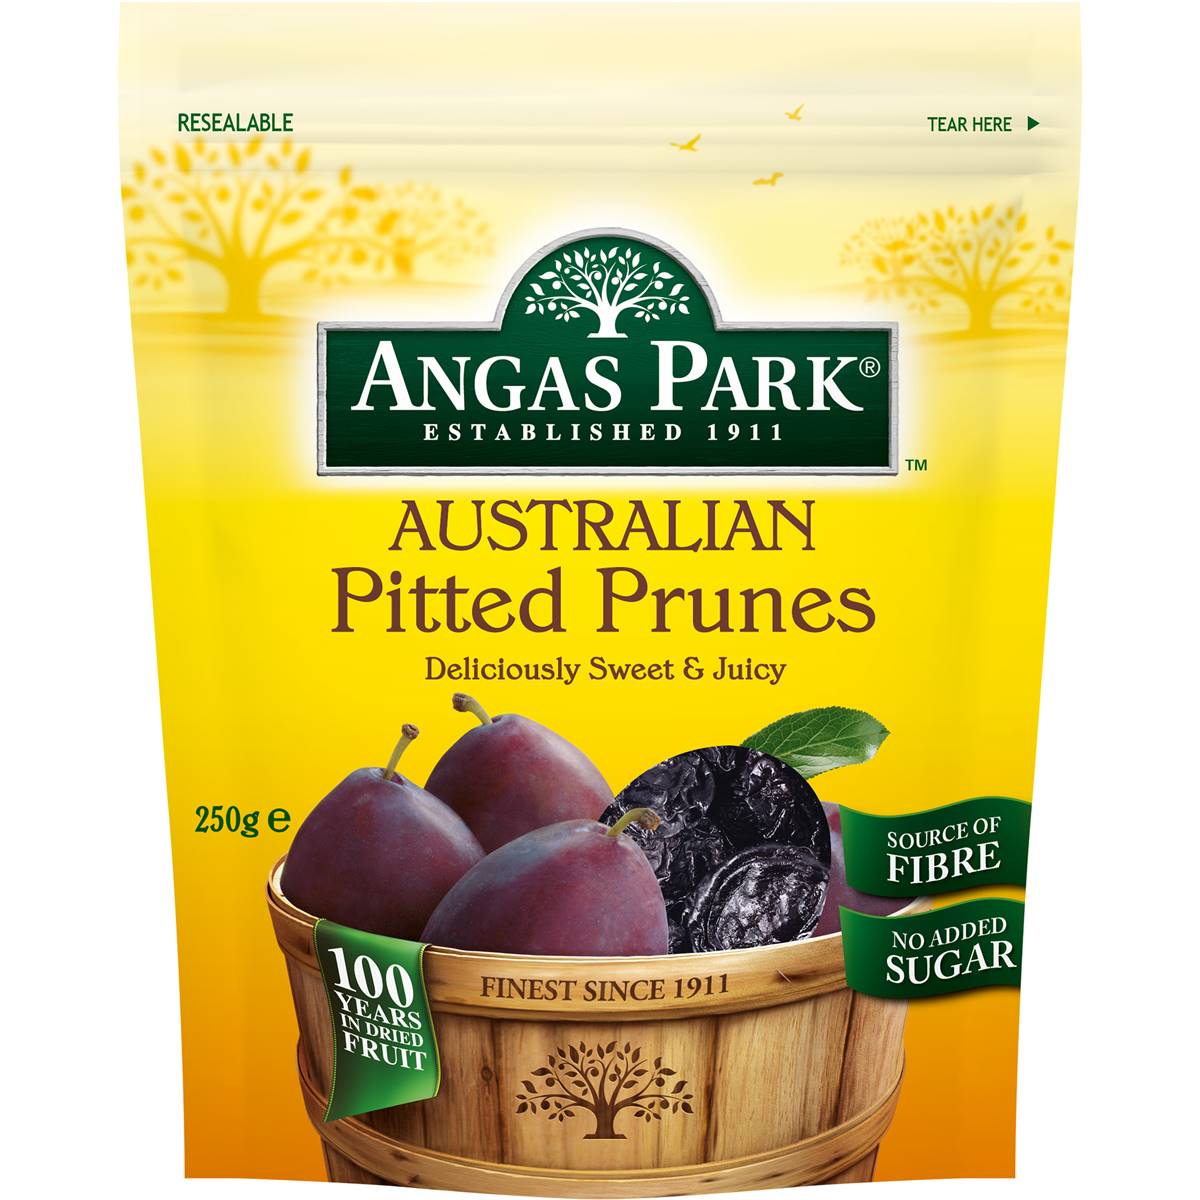 Calories in Angas Park Prunes Pitted